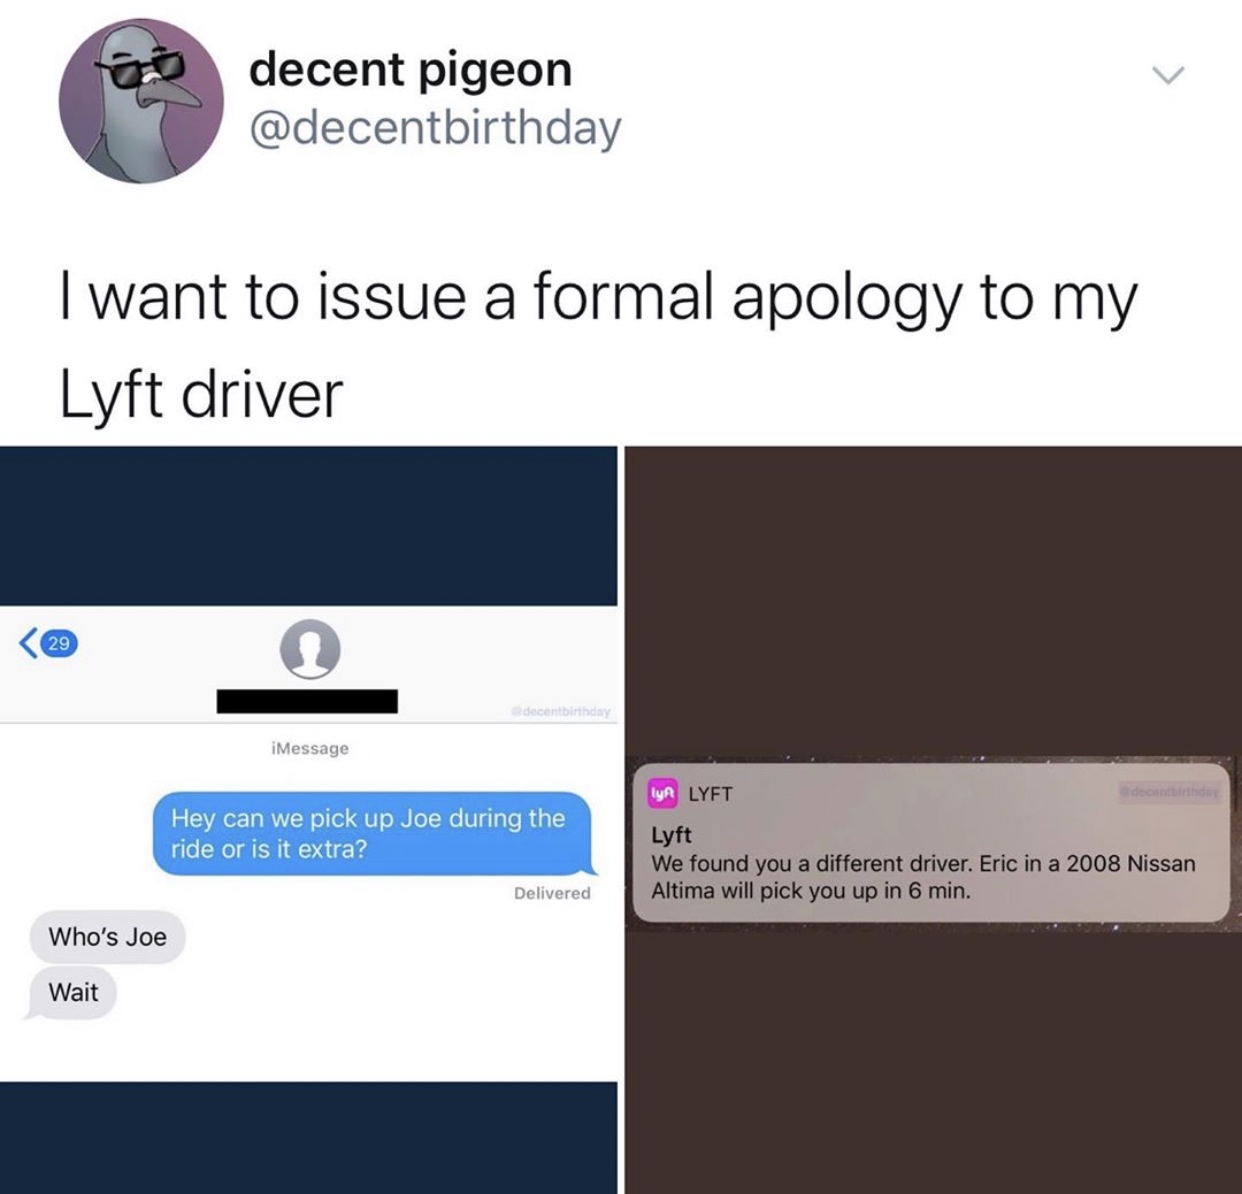 multimedia - decent pigeon I want to issue a formal apology to my Lyft driver decentbirthday Message Hey can we pick up Joe during the ride or is it extra? Ya Lyft Lyft We found you a different driver. Eric in a 2008 Nissan Altima will pick you up in 6 mi